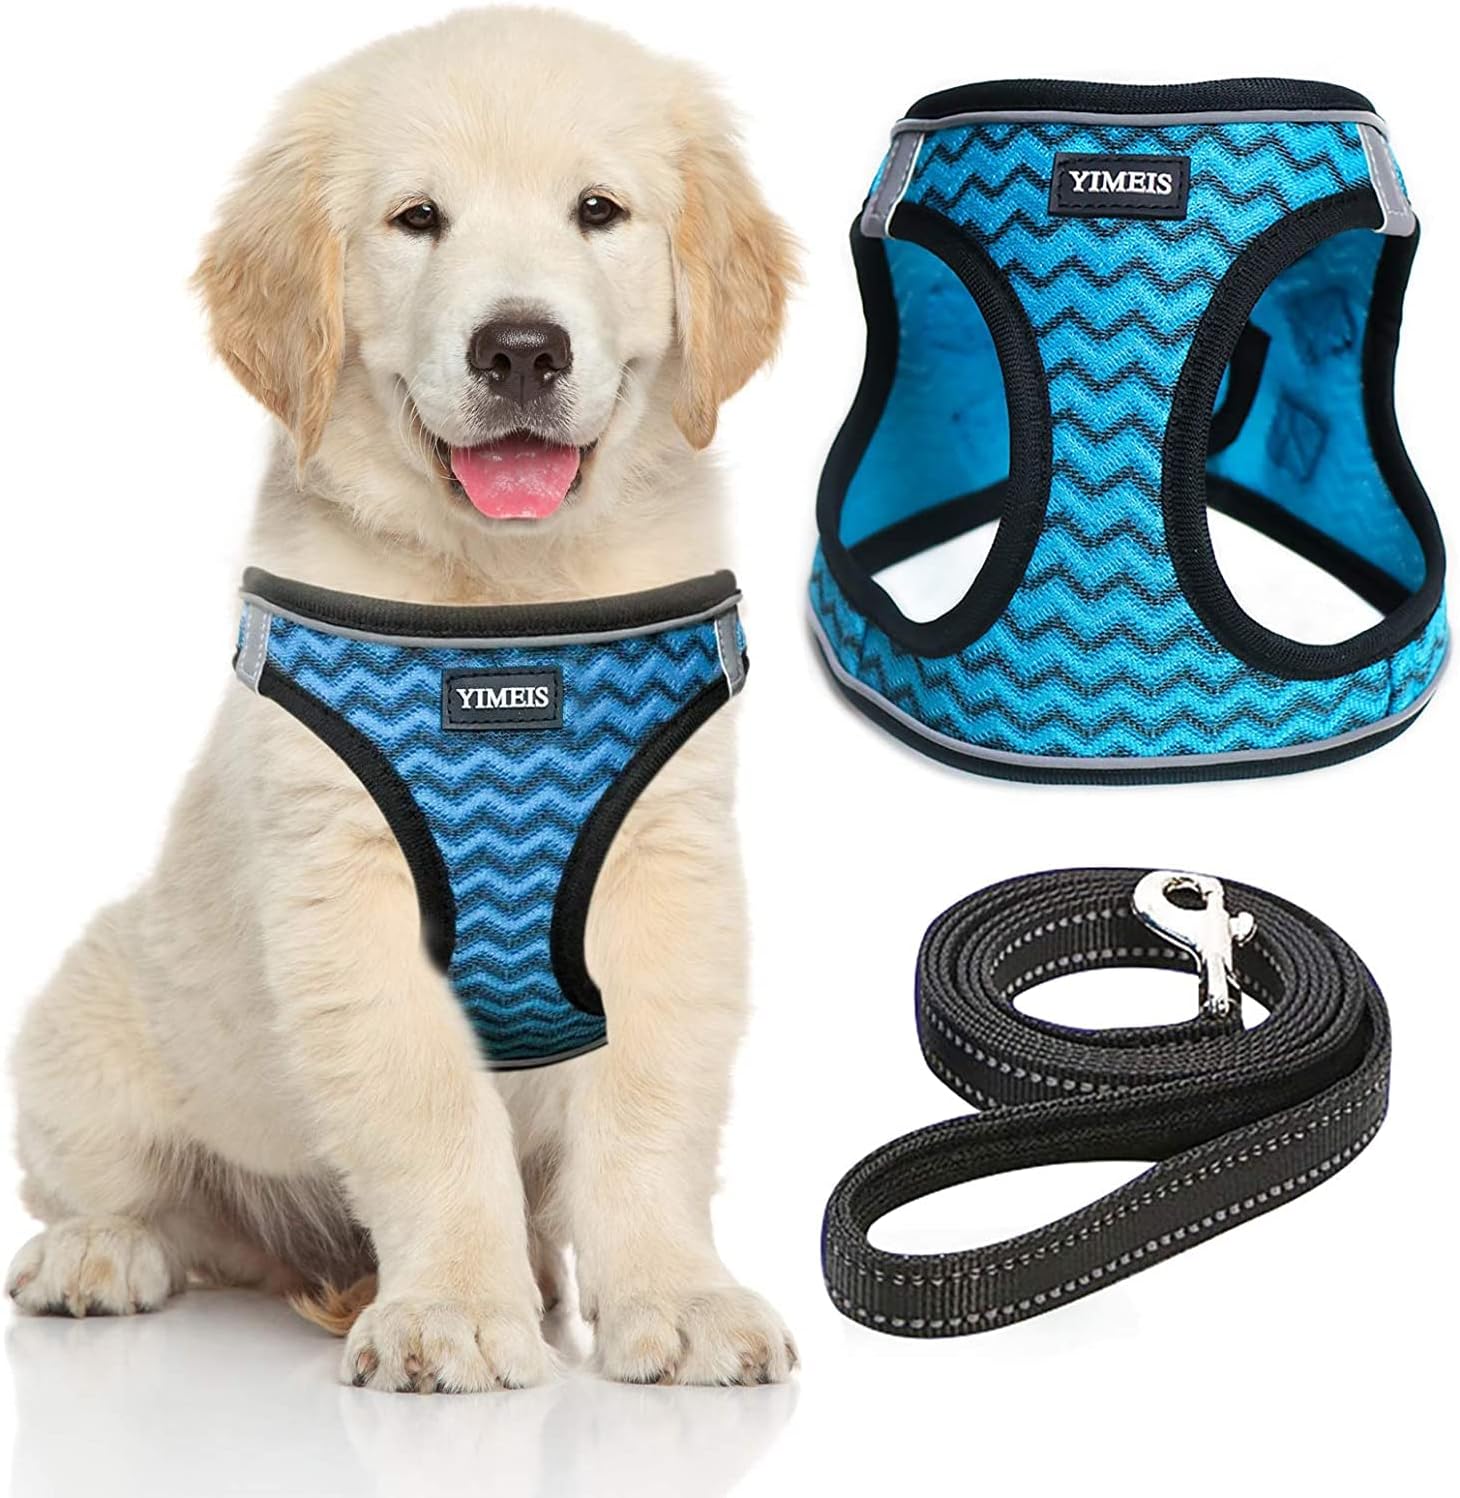 YIMEIS Dog Harness and Leash Set, No Pull Soft Mesh Pet Harness, Reflective Adjustable Puppy Vest for Small Medium Large Dogs, Cats (Blue, Medium (Pack of 1)